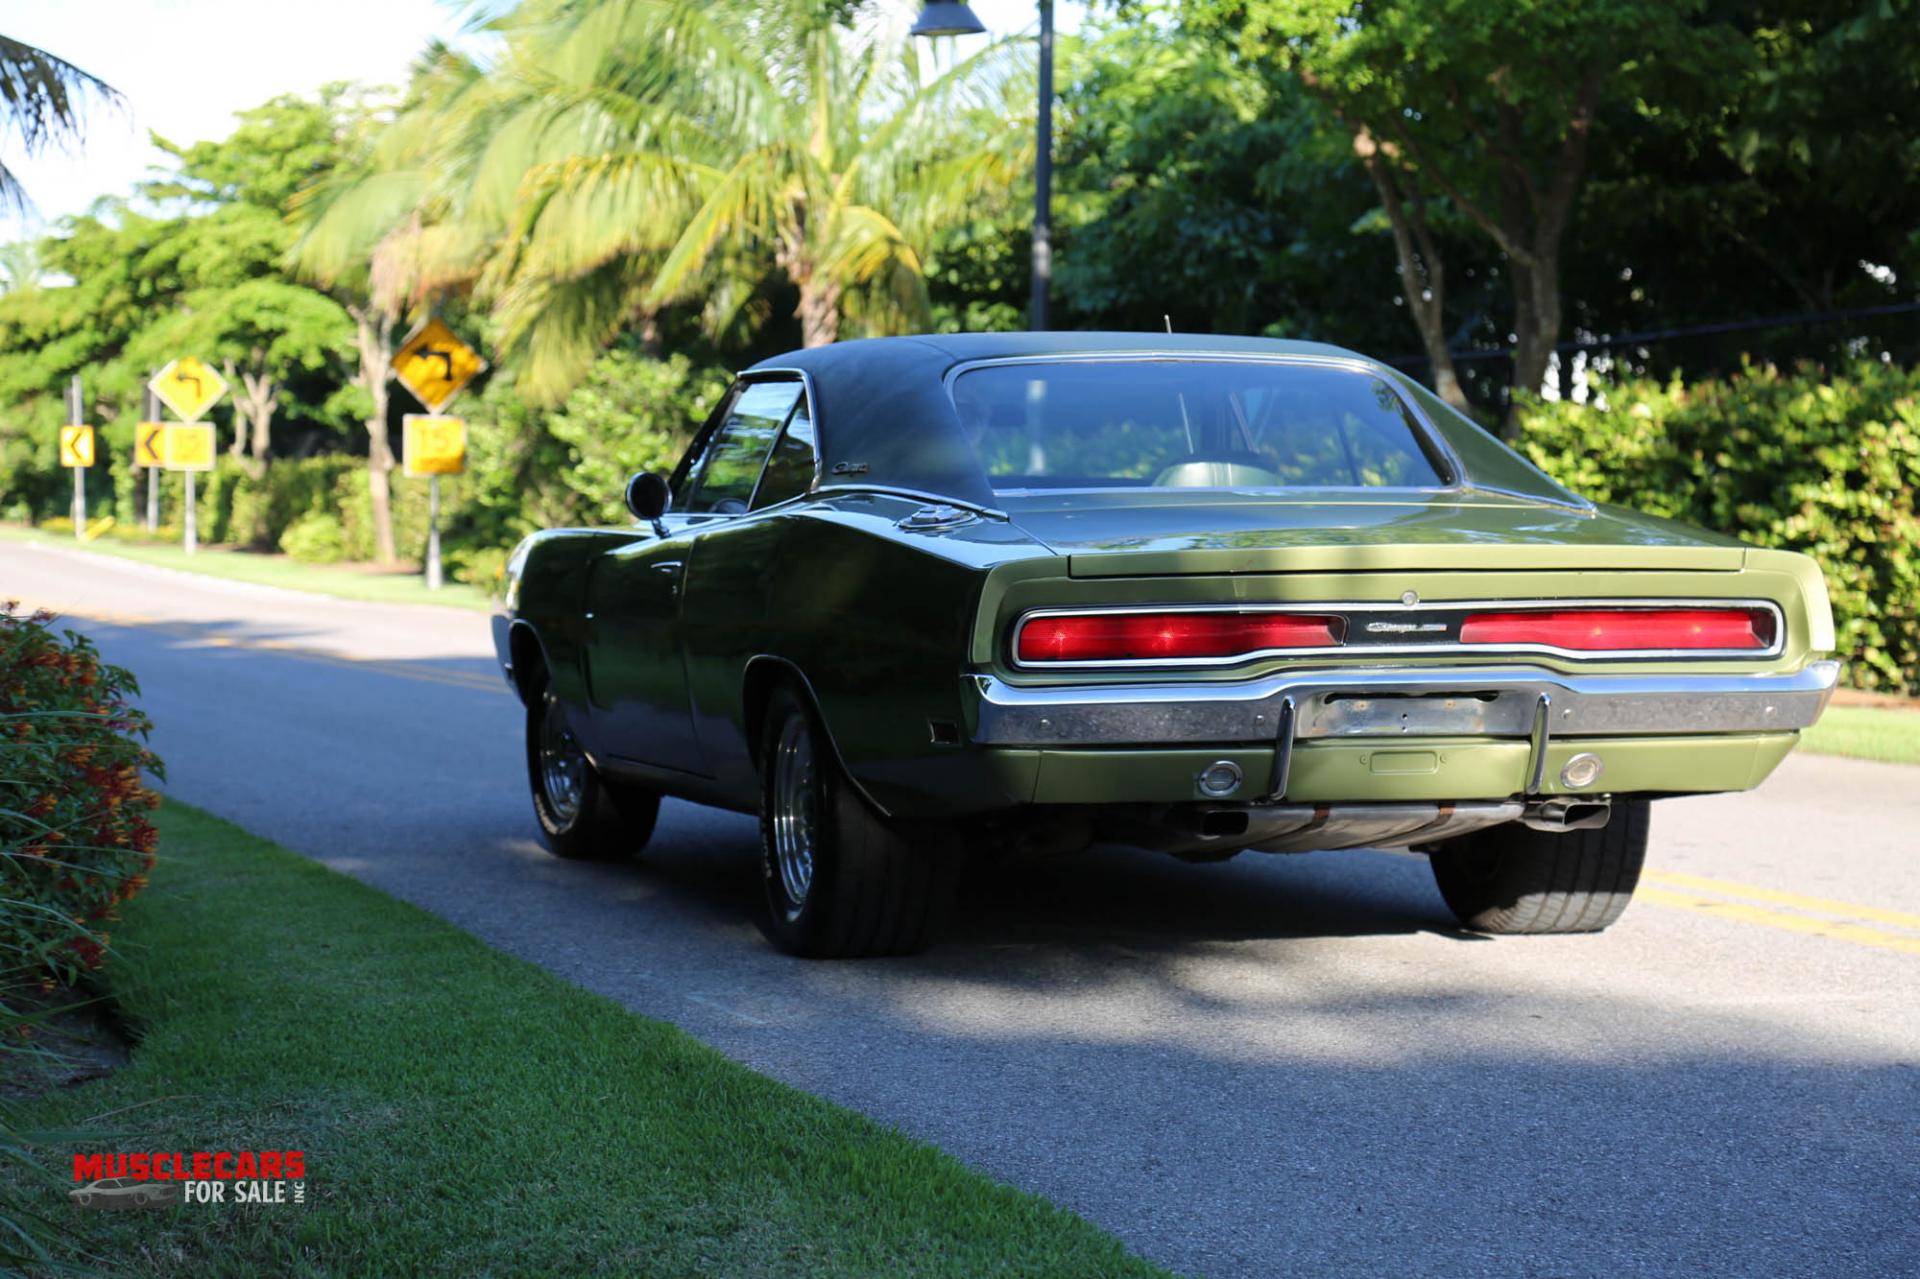 Used 1970 Dodge Charger For Sale 35 000 Muscle Cars For Sale